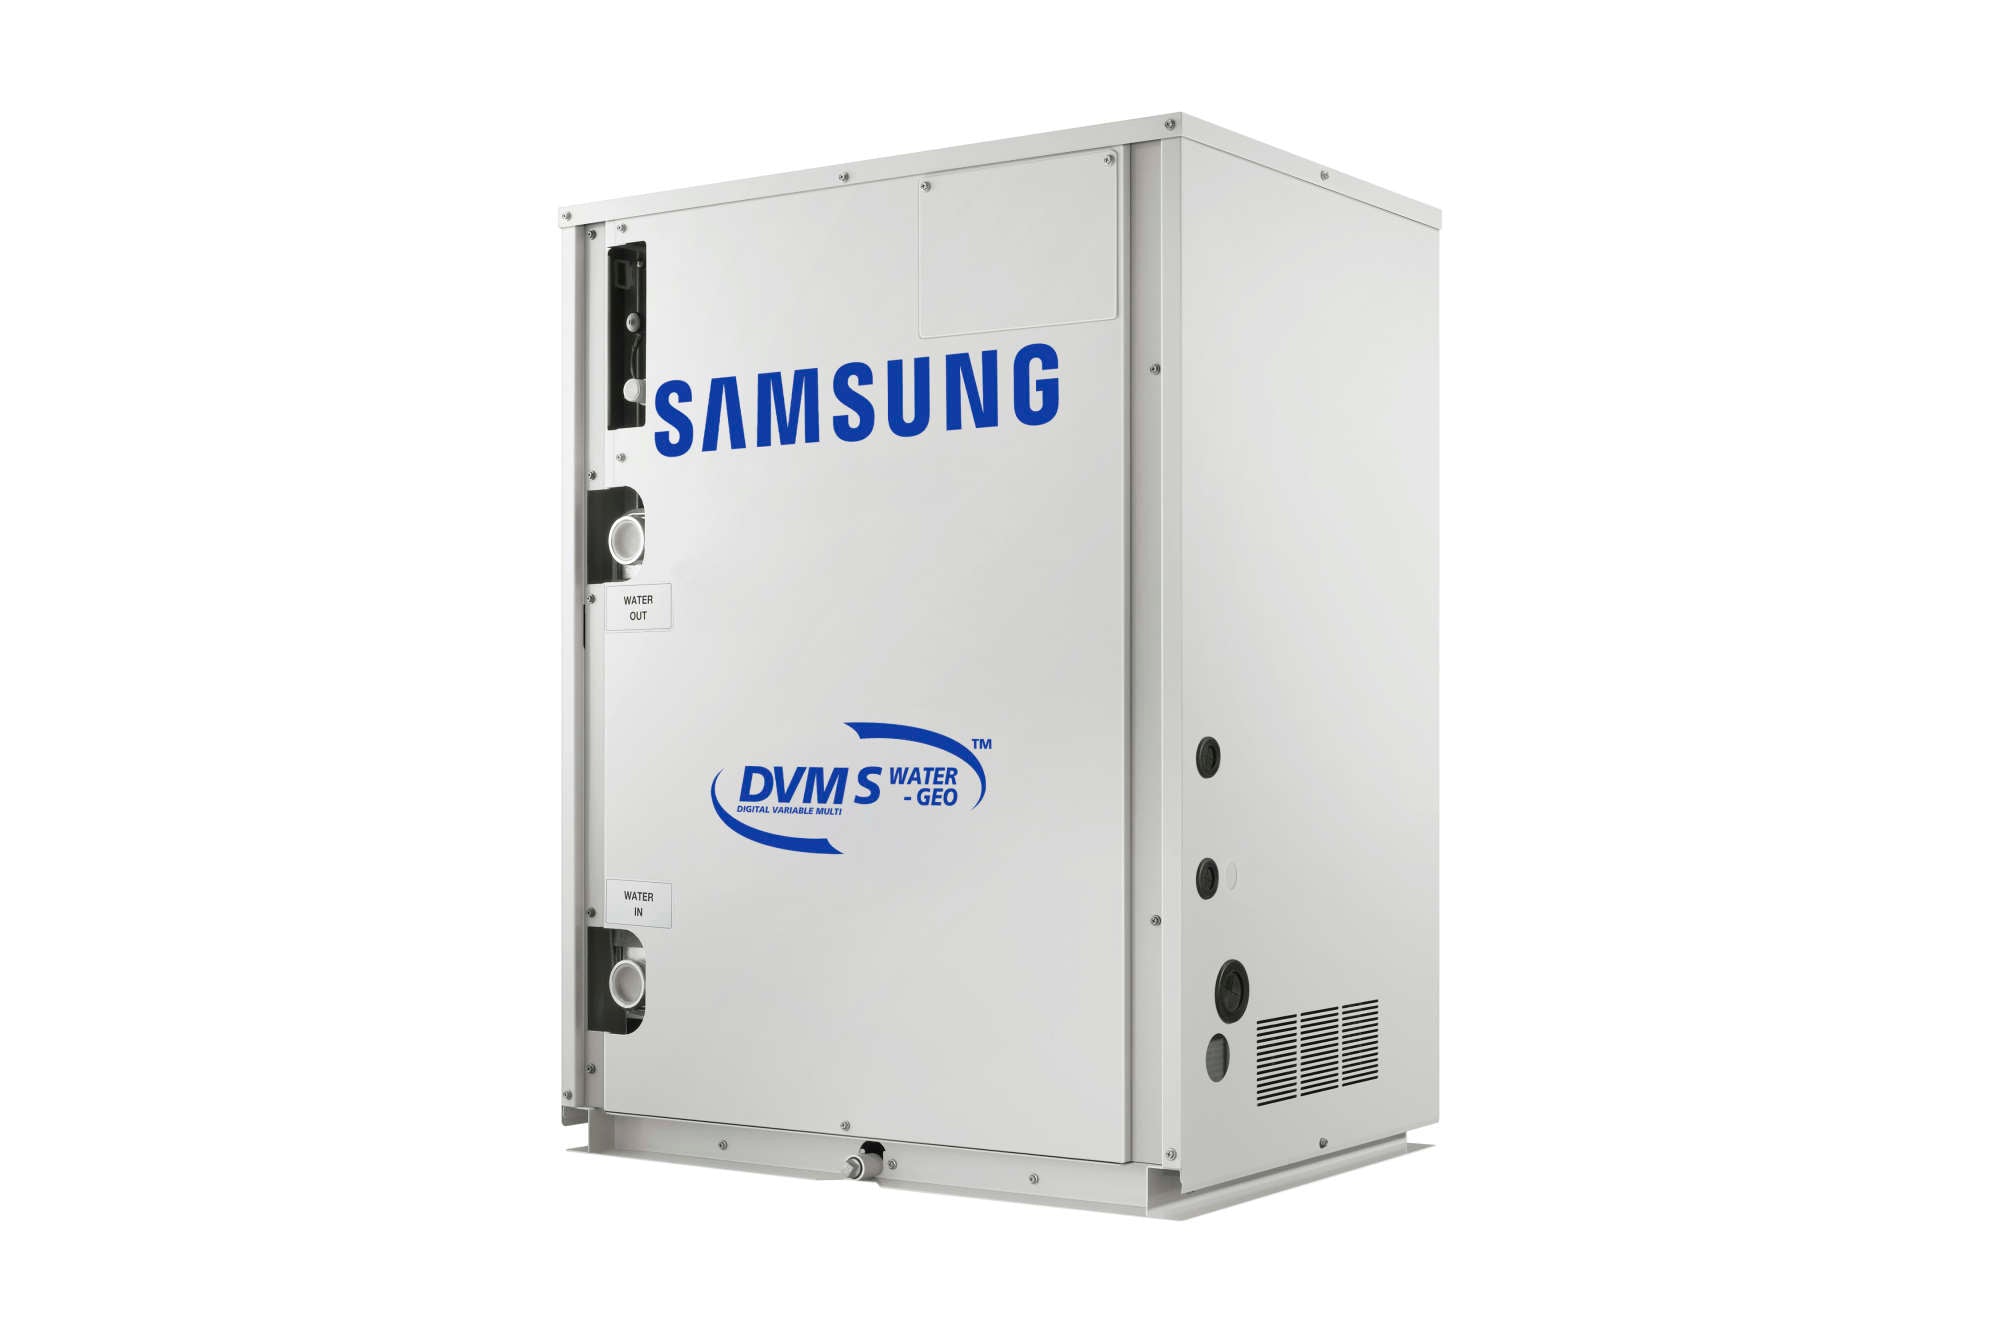 Samsung AM240KXWAFR/AA Air Conditioner DVM S WATER Air Conditioning System